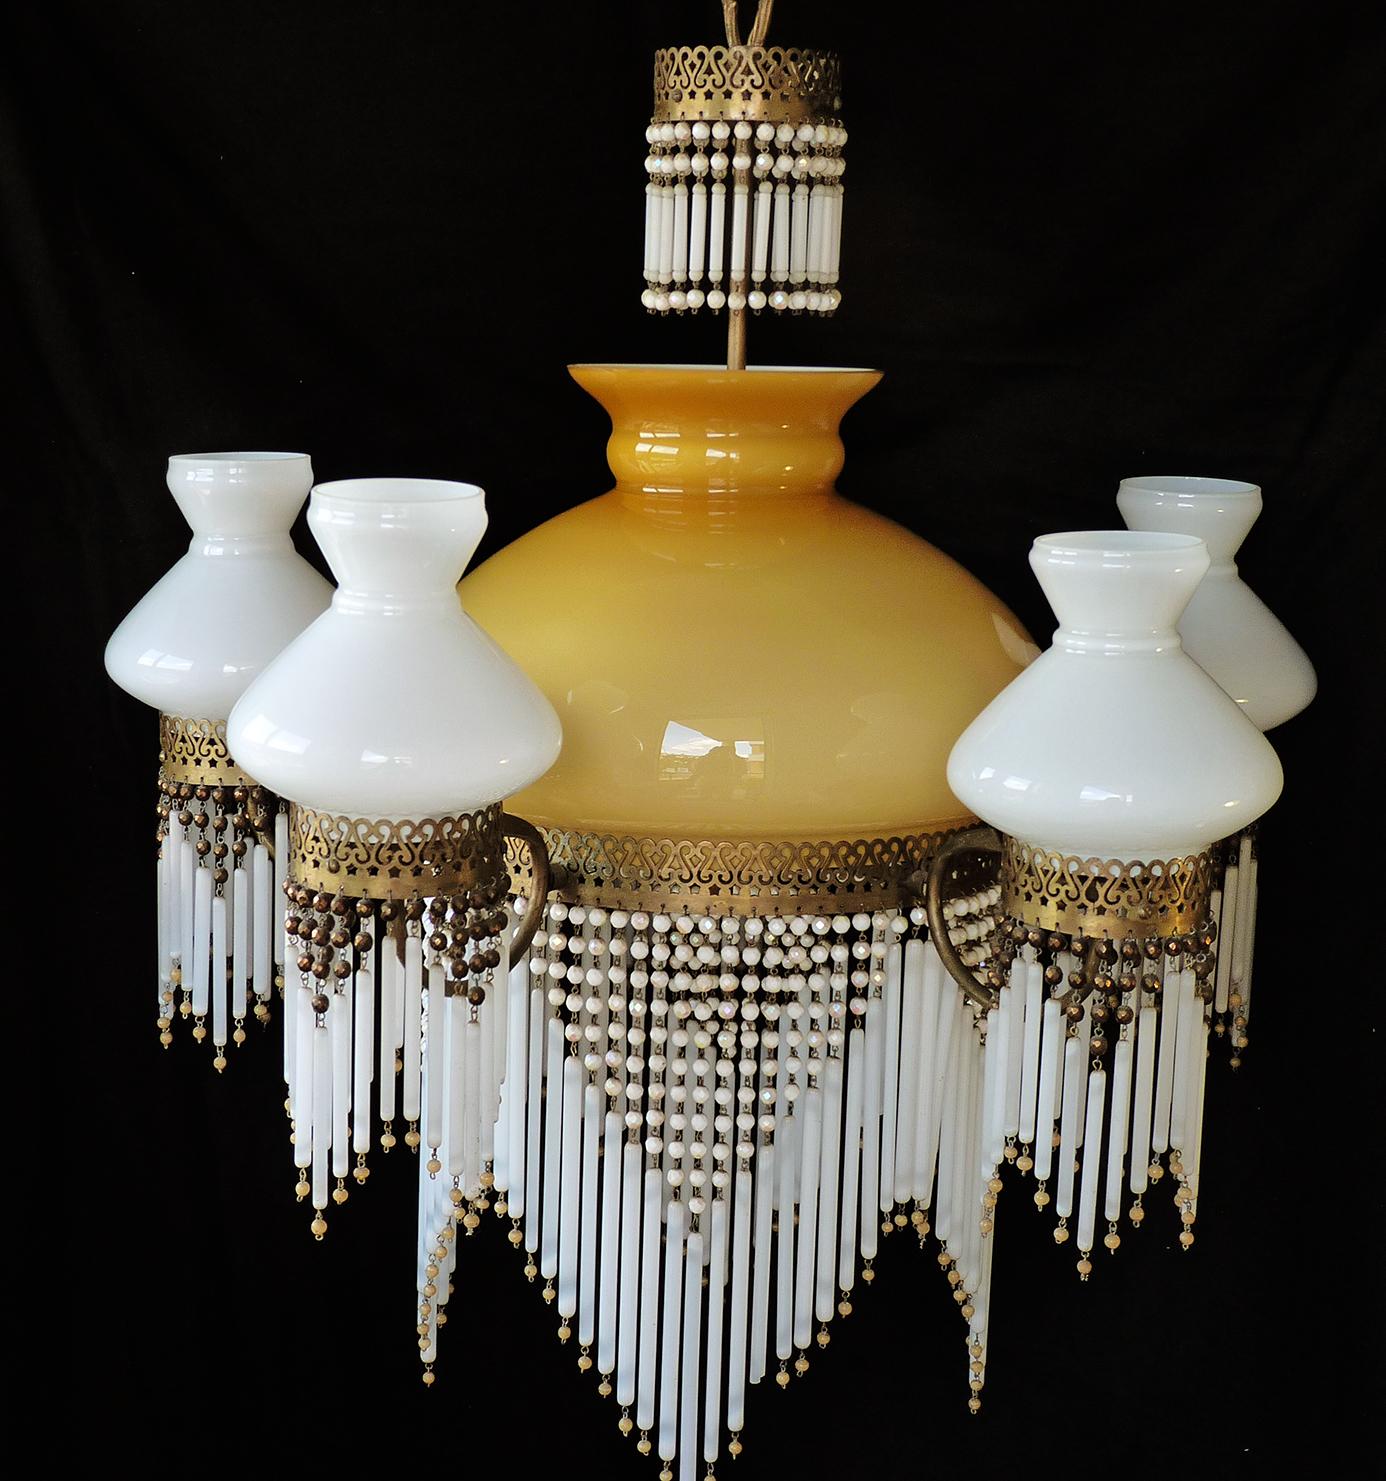 Gorgeous large antique French chandelier in amber opaline cased glass and white straws Art Deco or Art Nouveau
Pressed metal and hundreds of glass straw tubes adorned with beads on the end of each tube, 1930s
Dimensions
Height: 39.38 in. (100